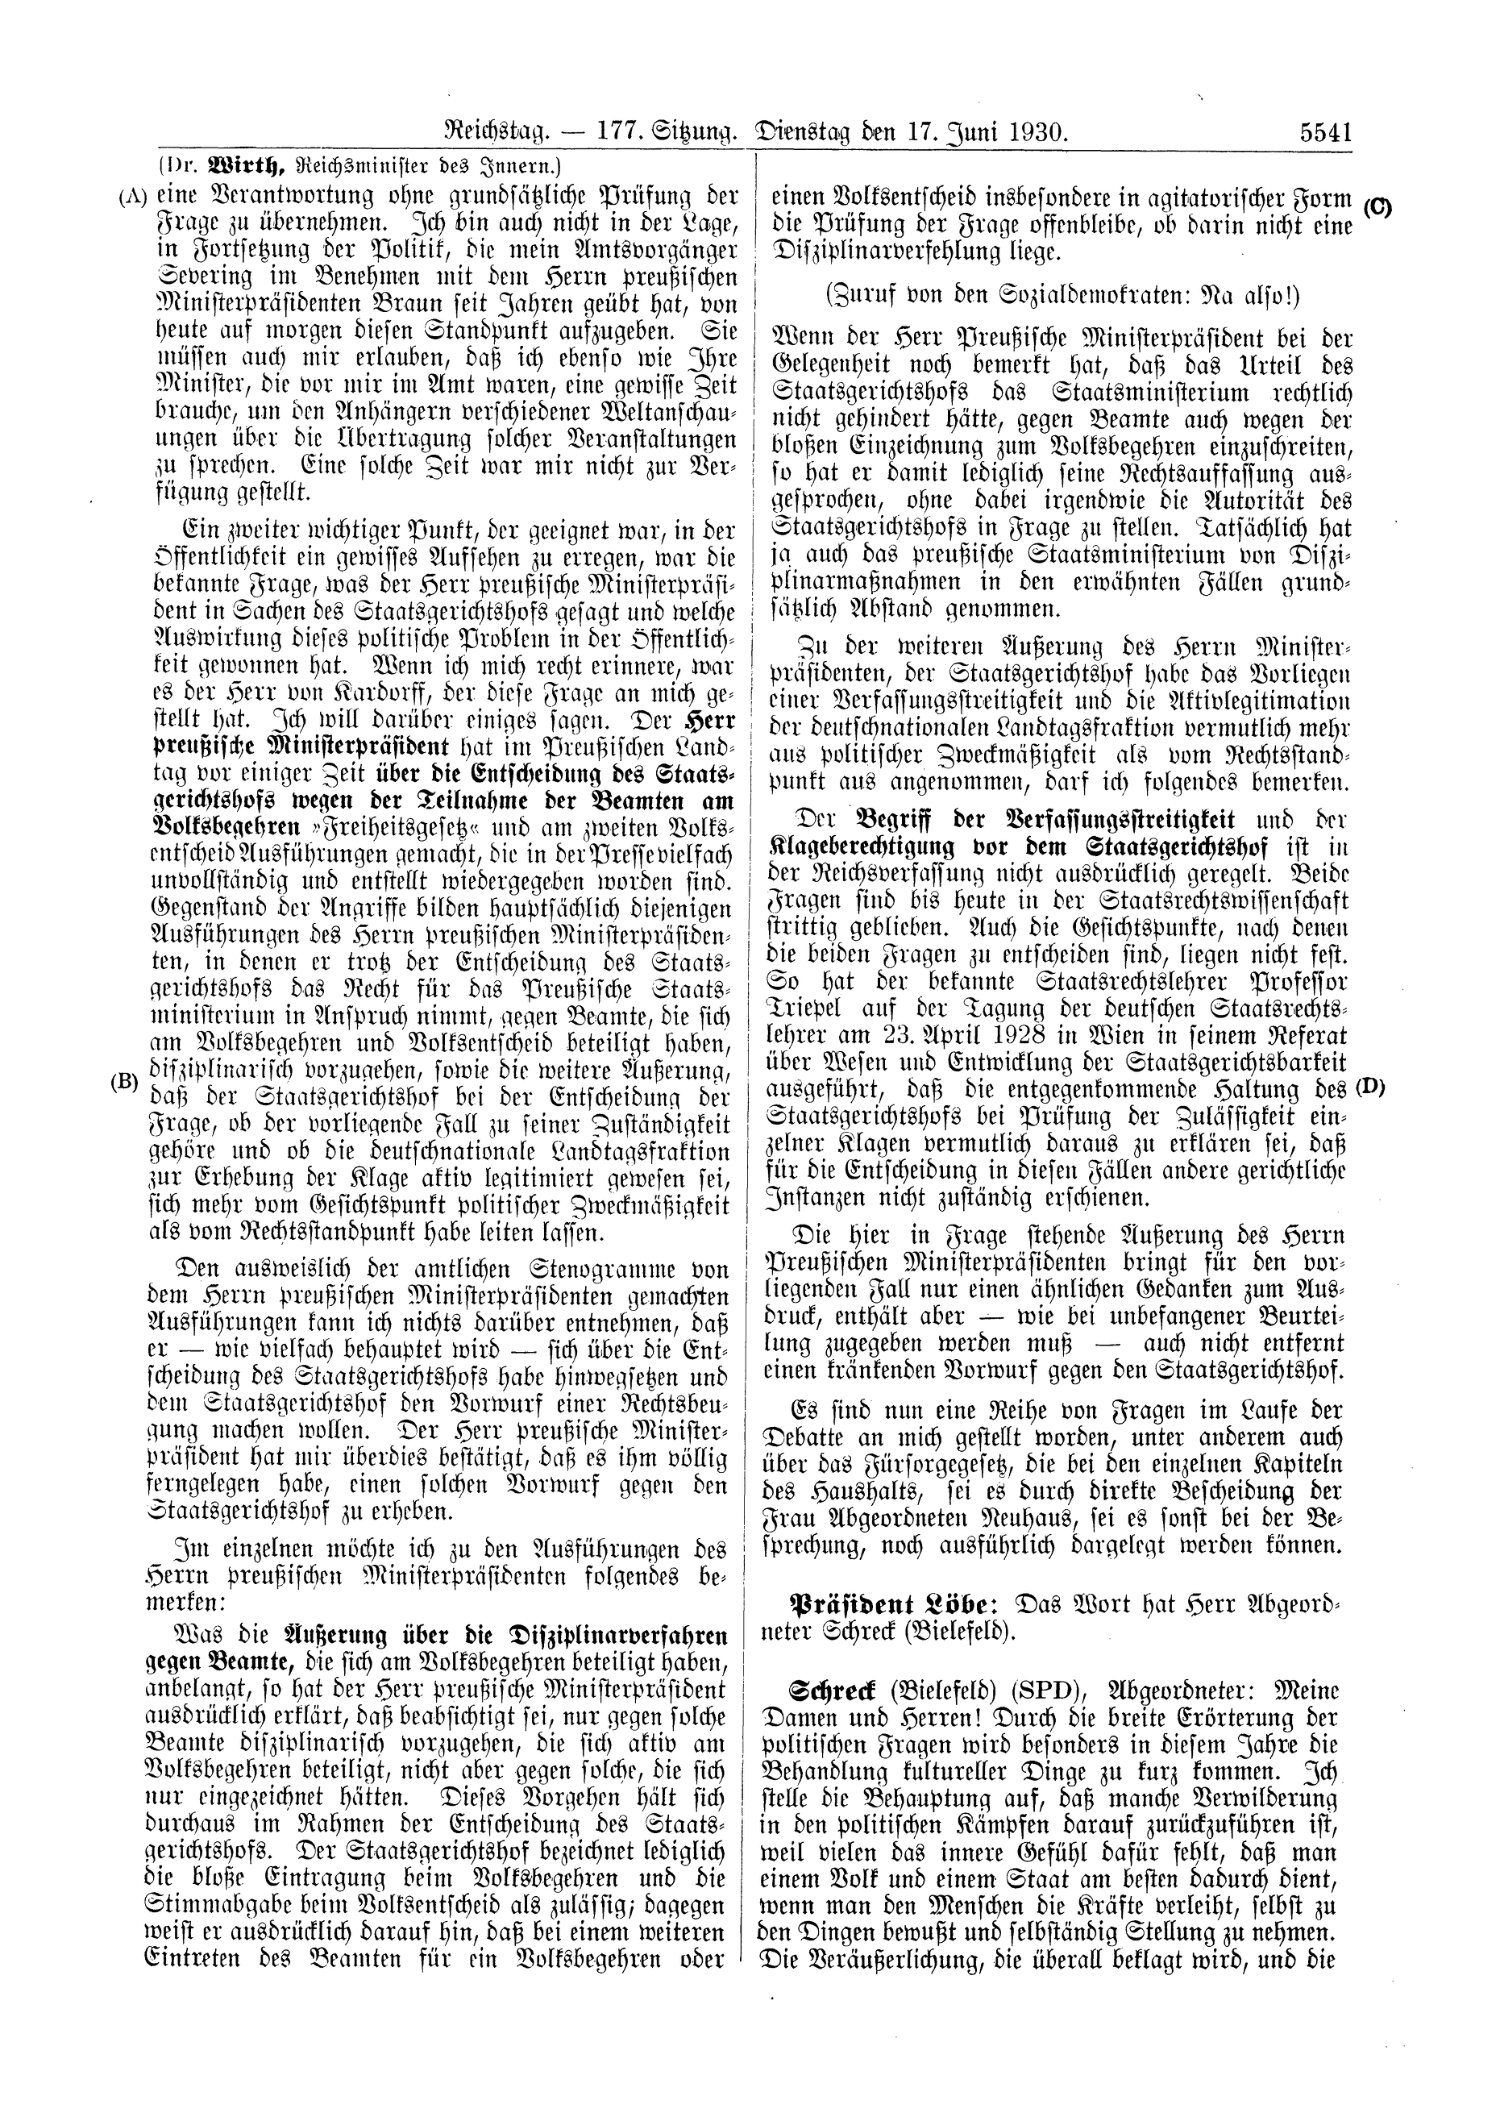 Scan of page 5541